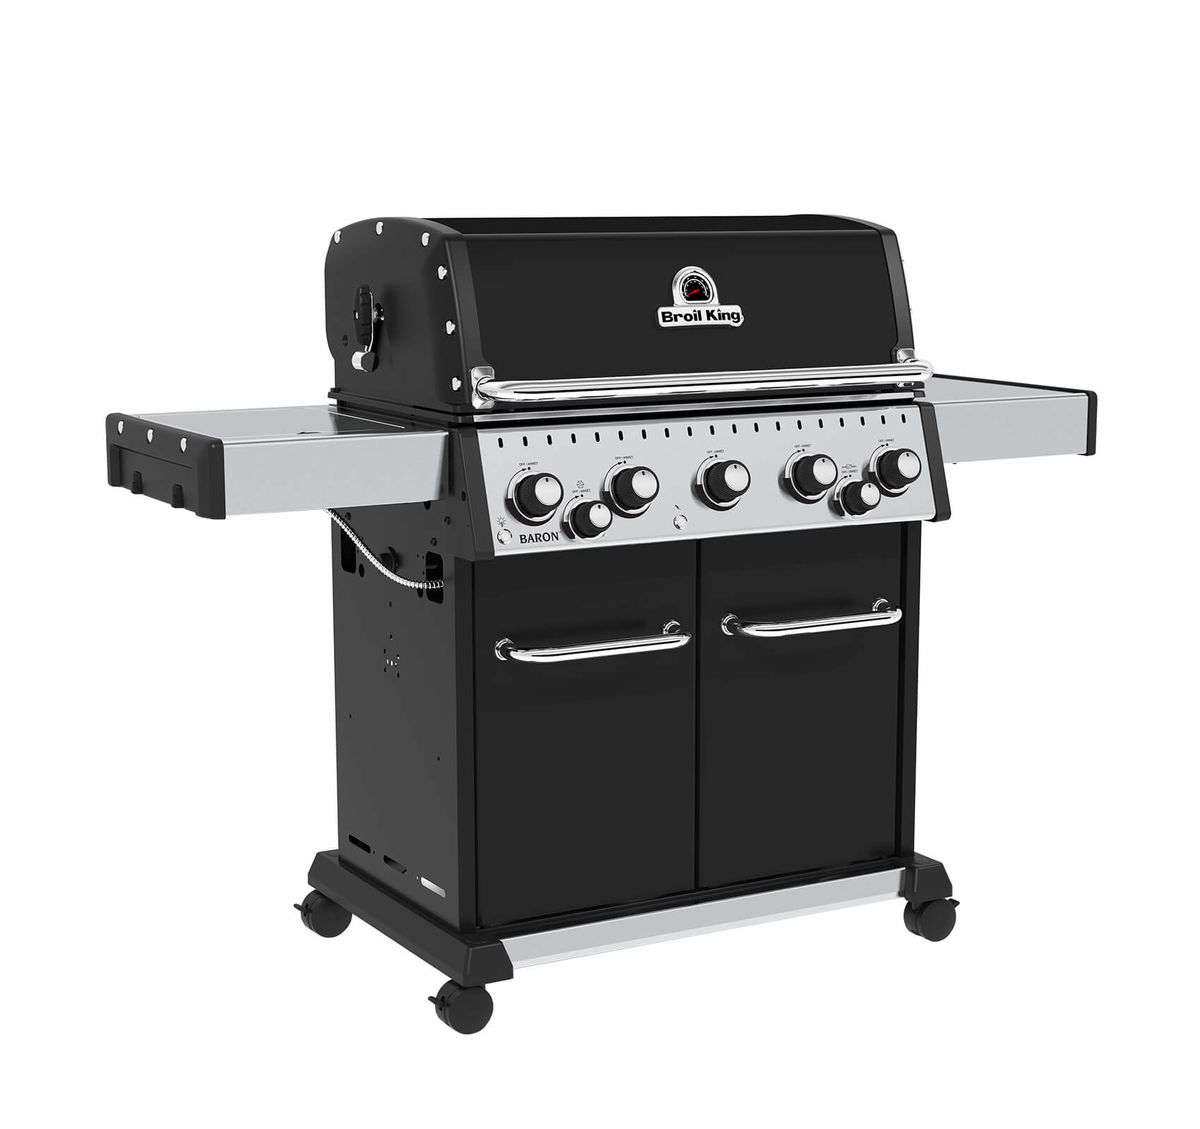 Image of Broil King Baron 590 Gasgrill bei nettoshop.ch